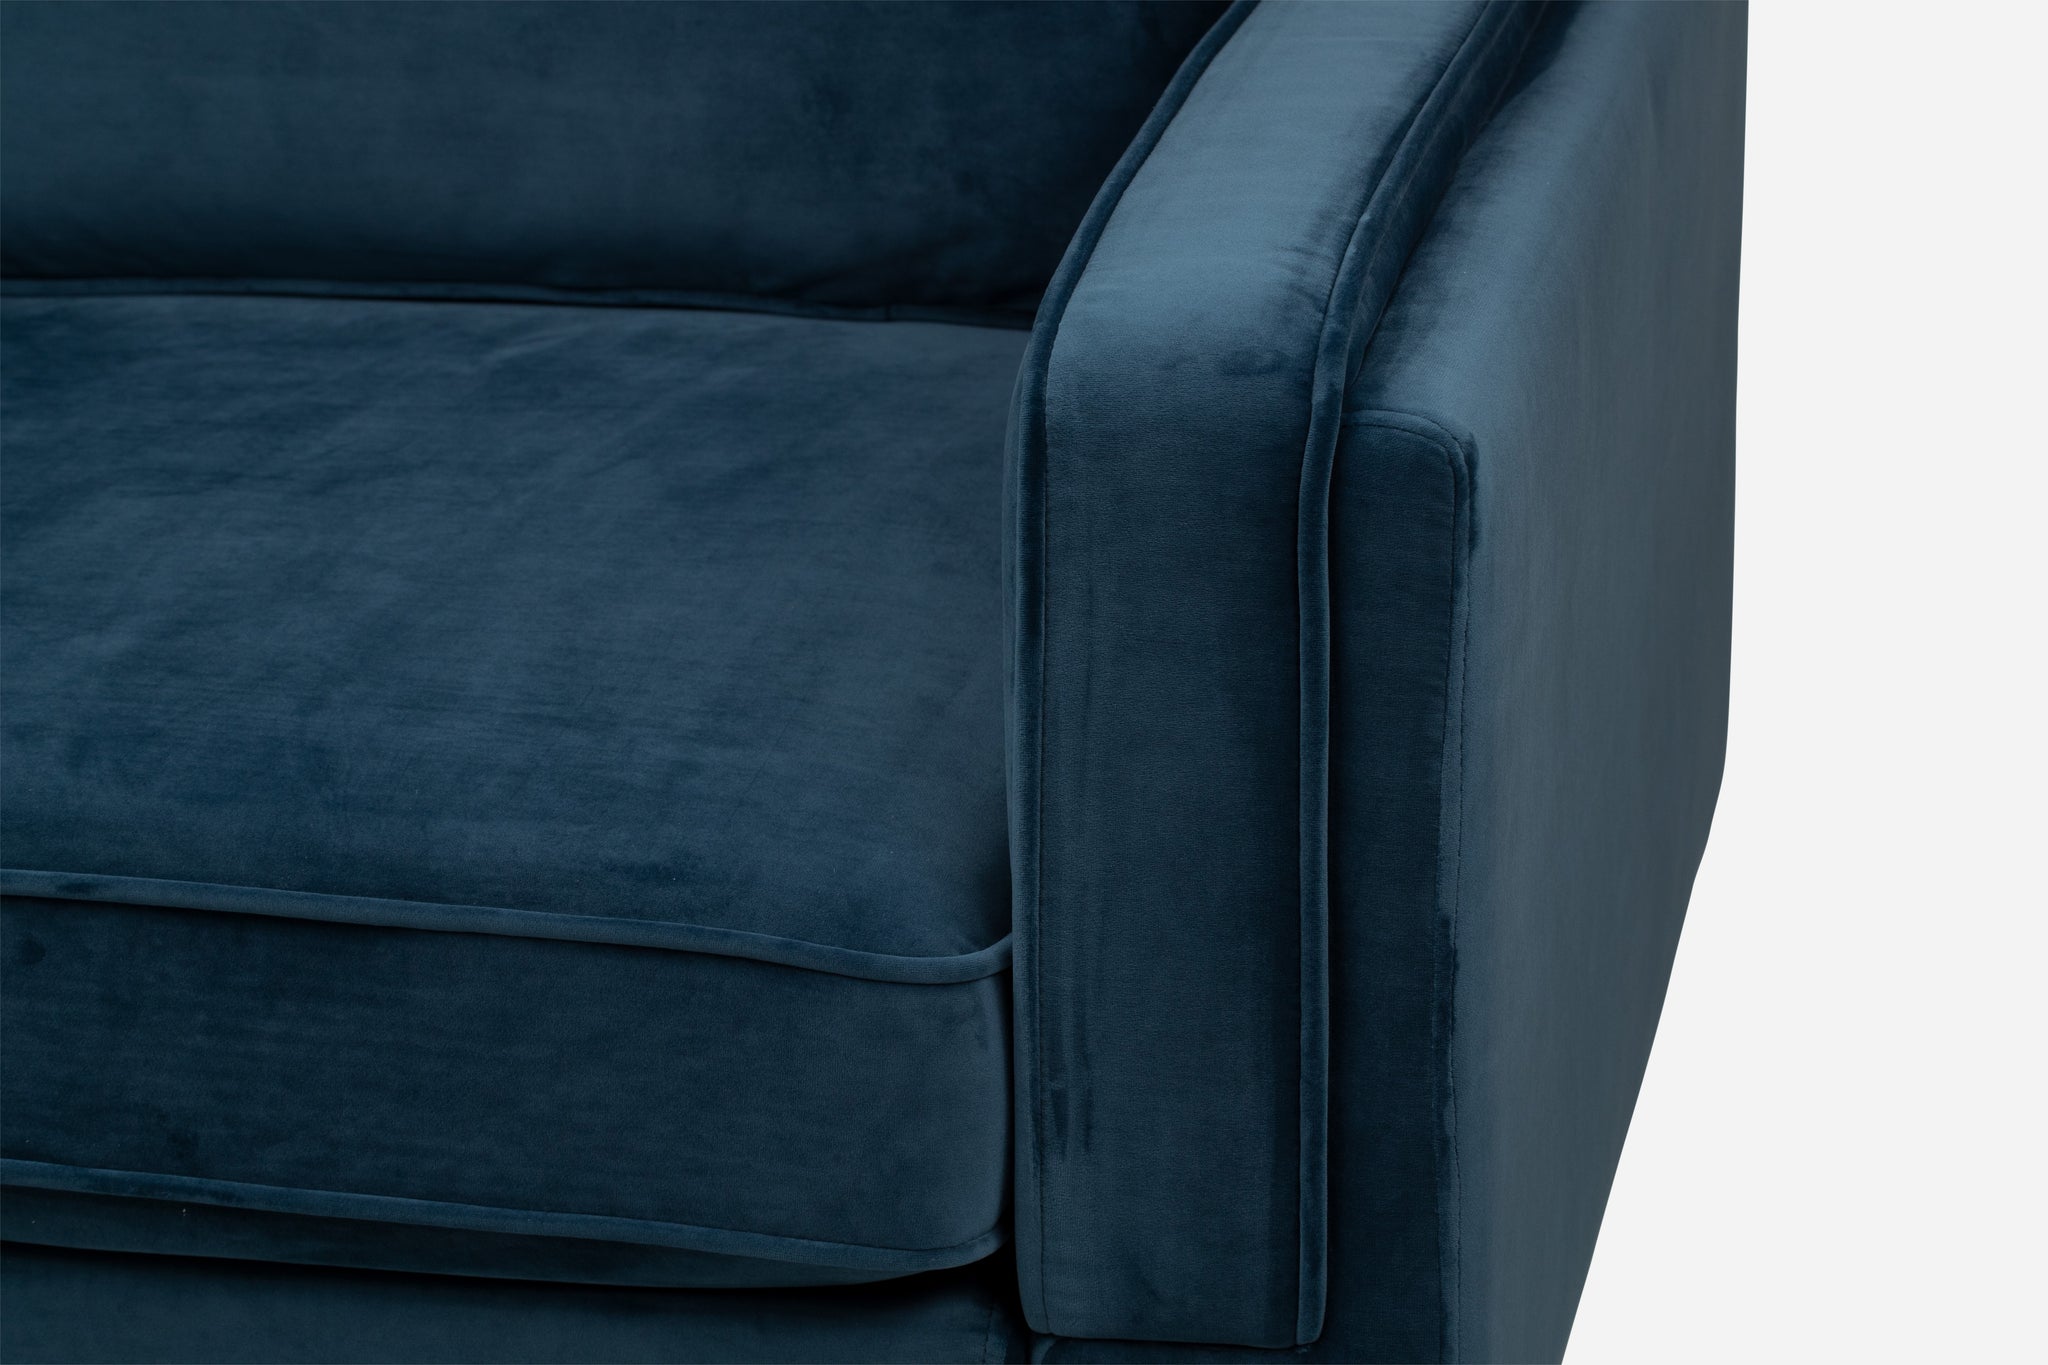 albany armchair shown in blue velvet with gold legs